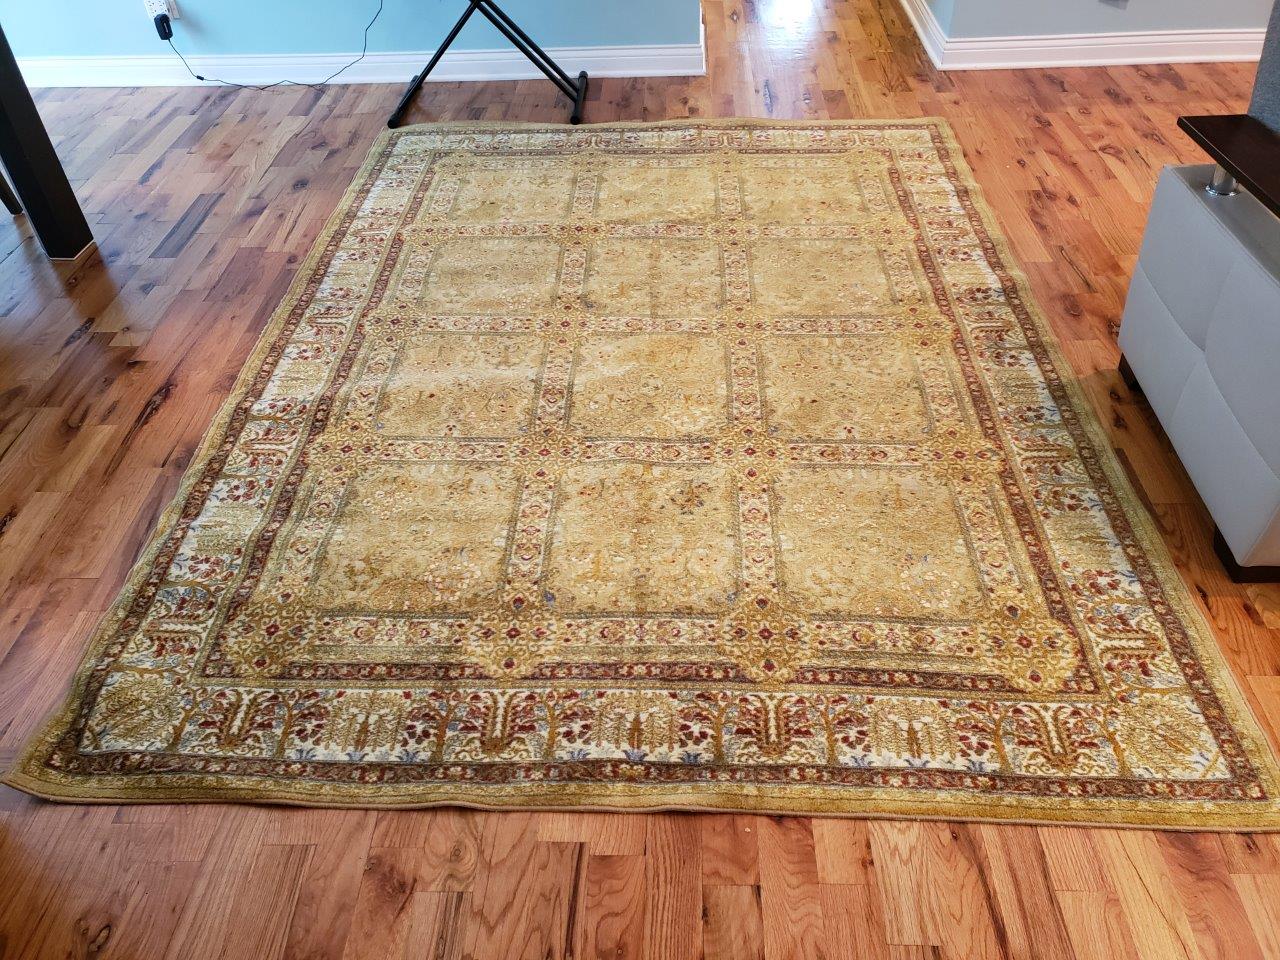 Medall panel rug 7 x 9 ft Antiquities collection carpet area rugs carpets